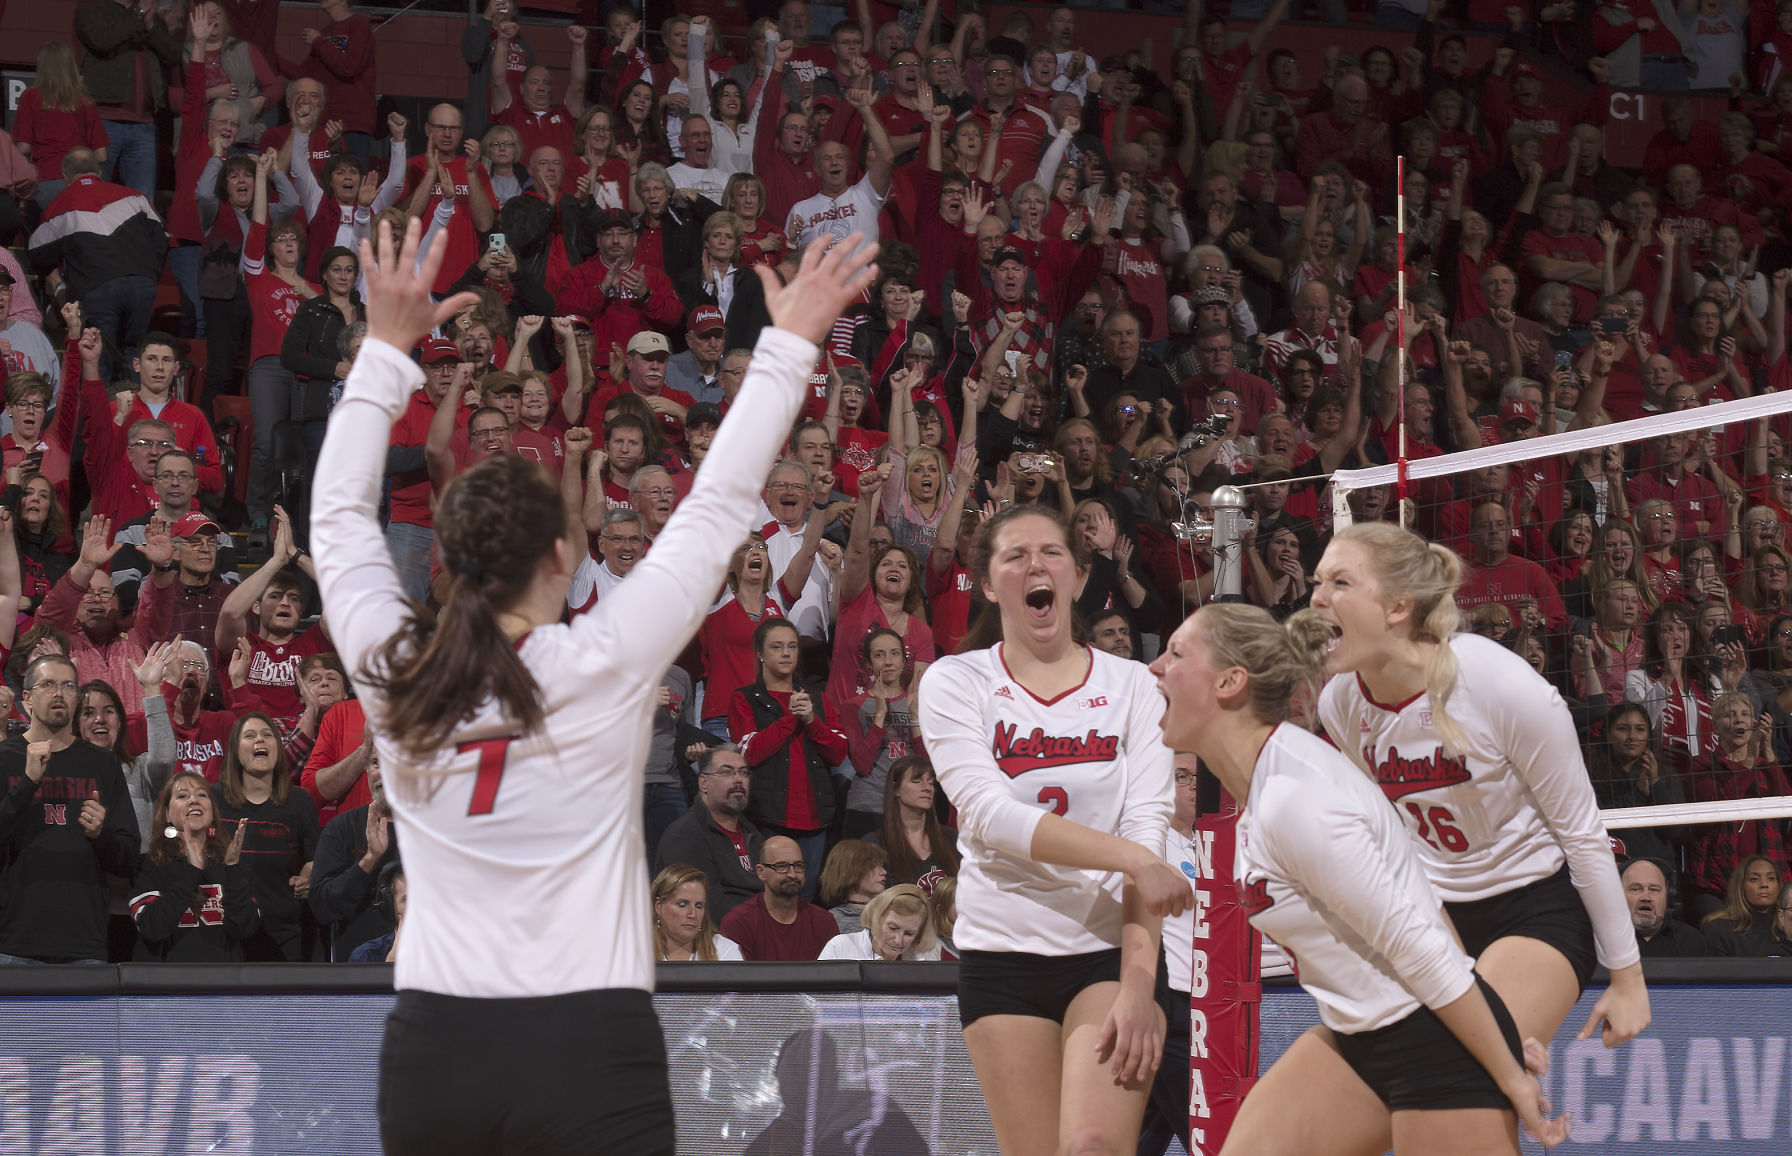 Nebraska volleyball schedule includes lots of home matches